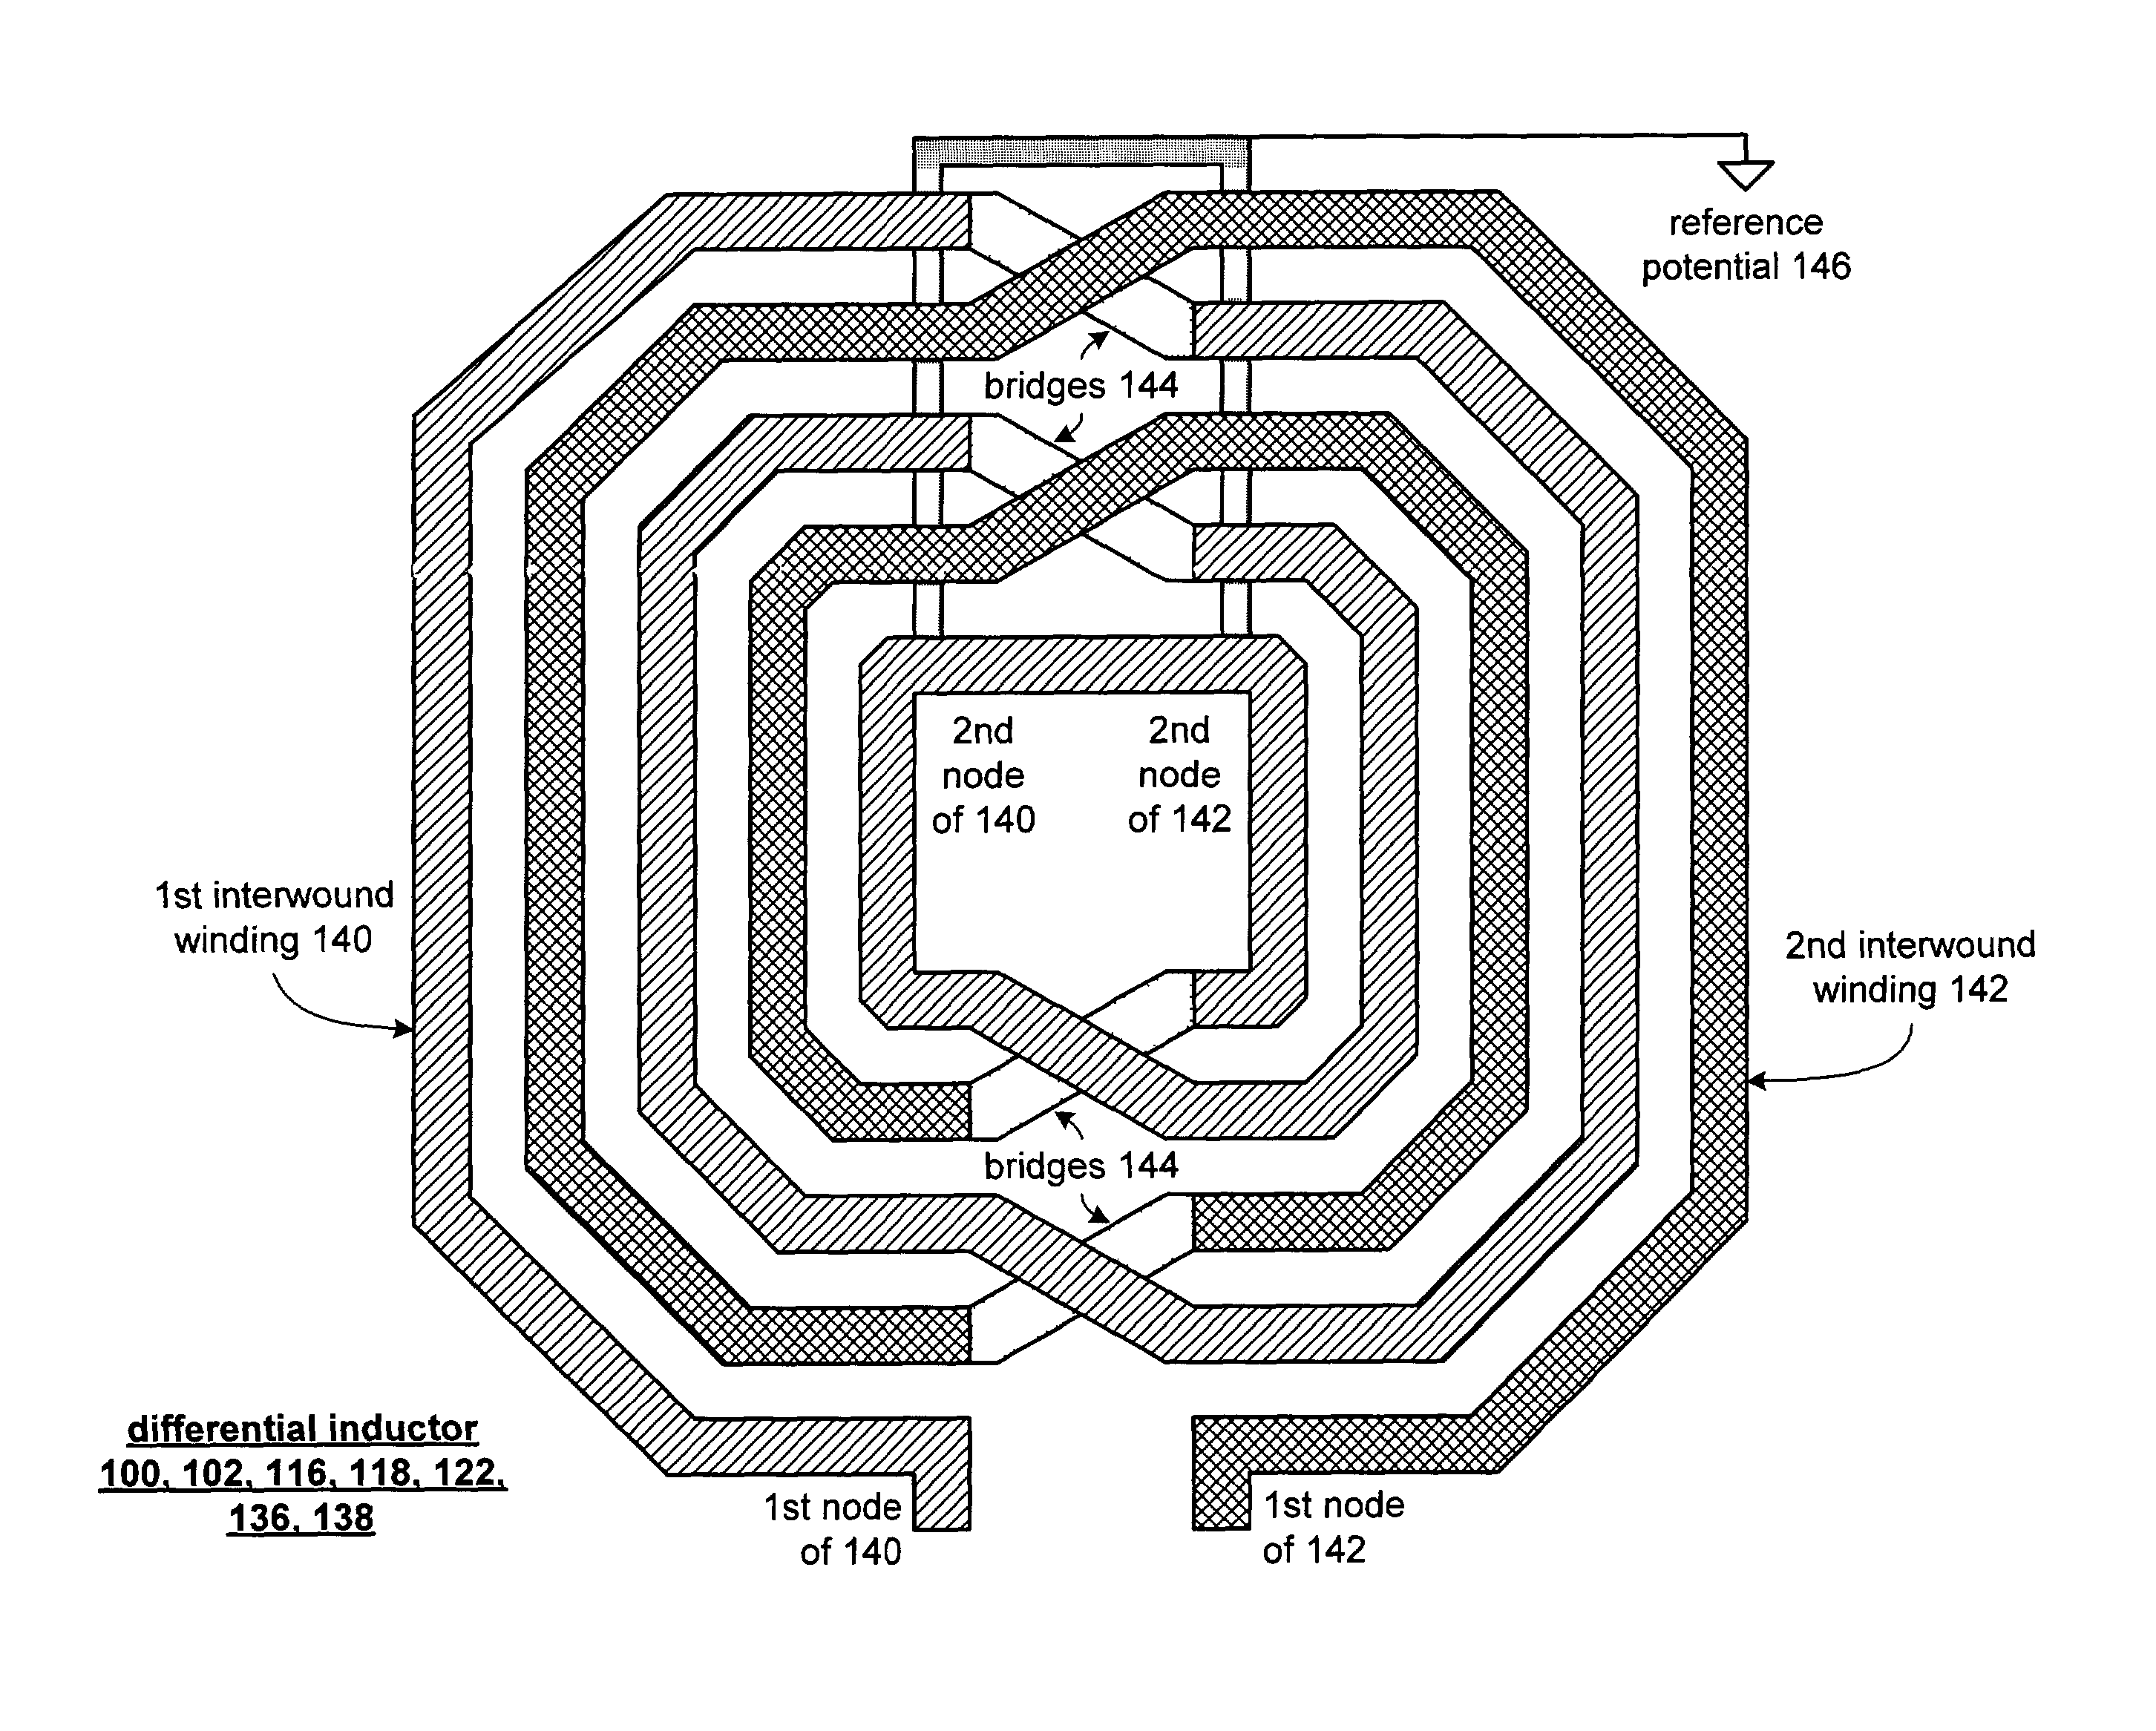 On-chip differential inductor and applications thereof